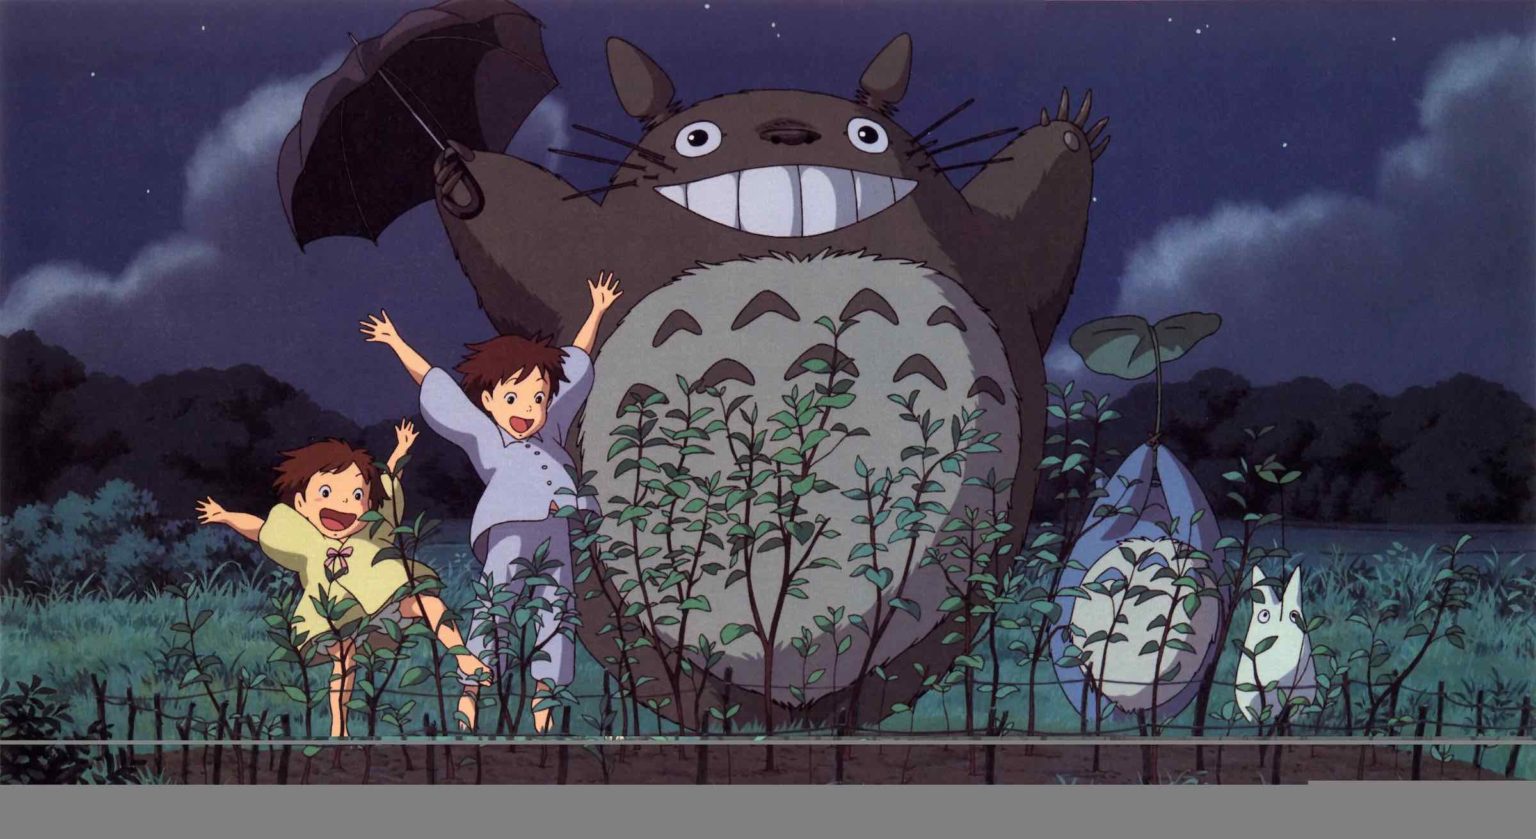 If you’re in a place where Netflix has the streaming rights to 'Grave of the Fireflies' and more, here are the very best Studio Ghibli films to watch.